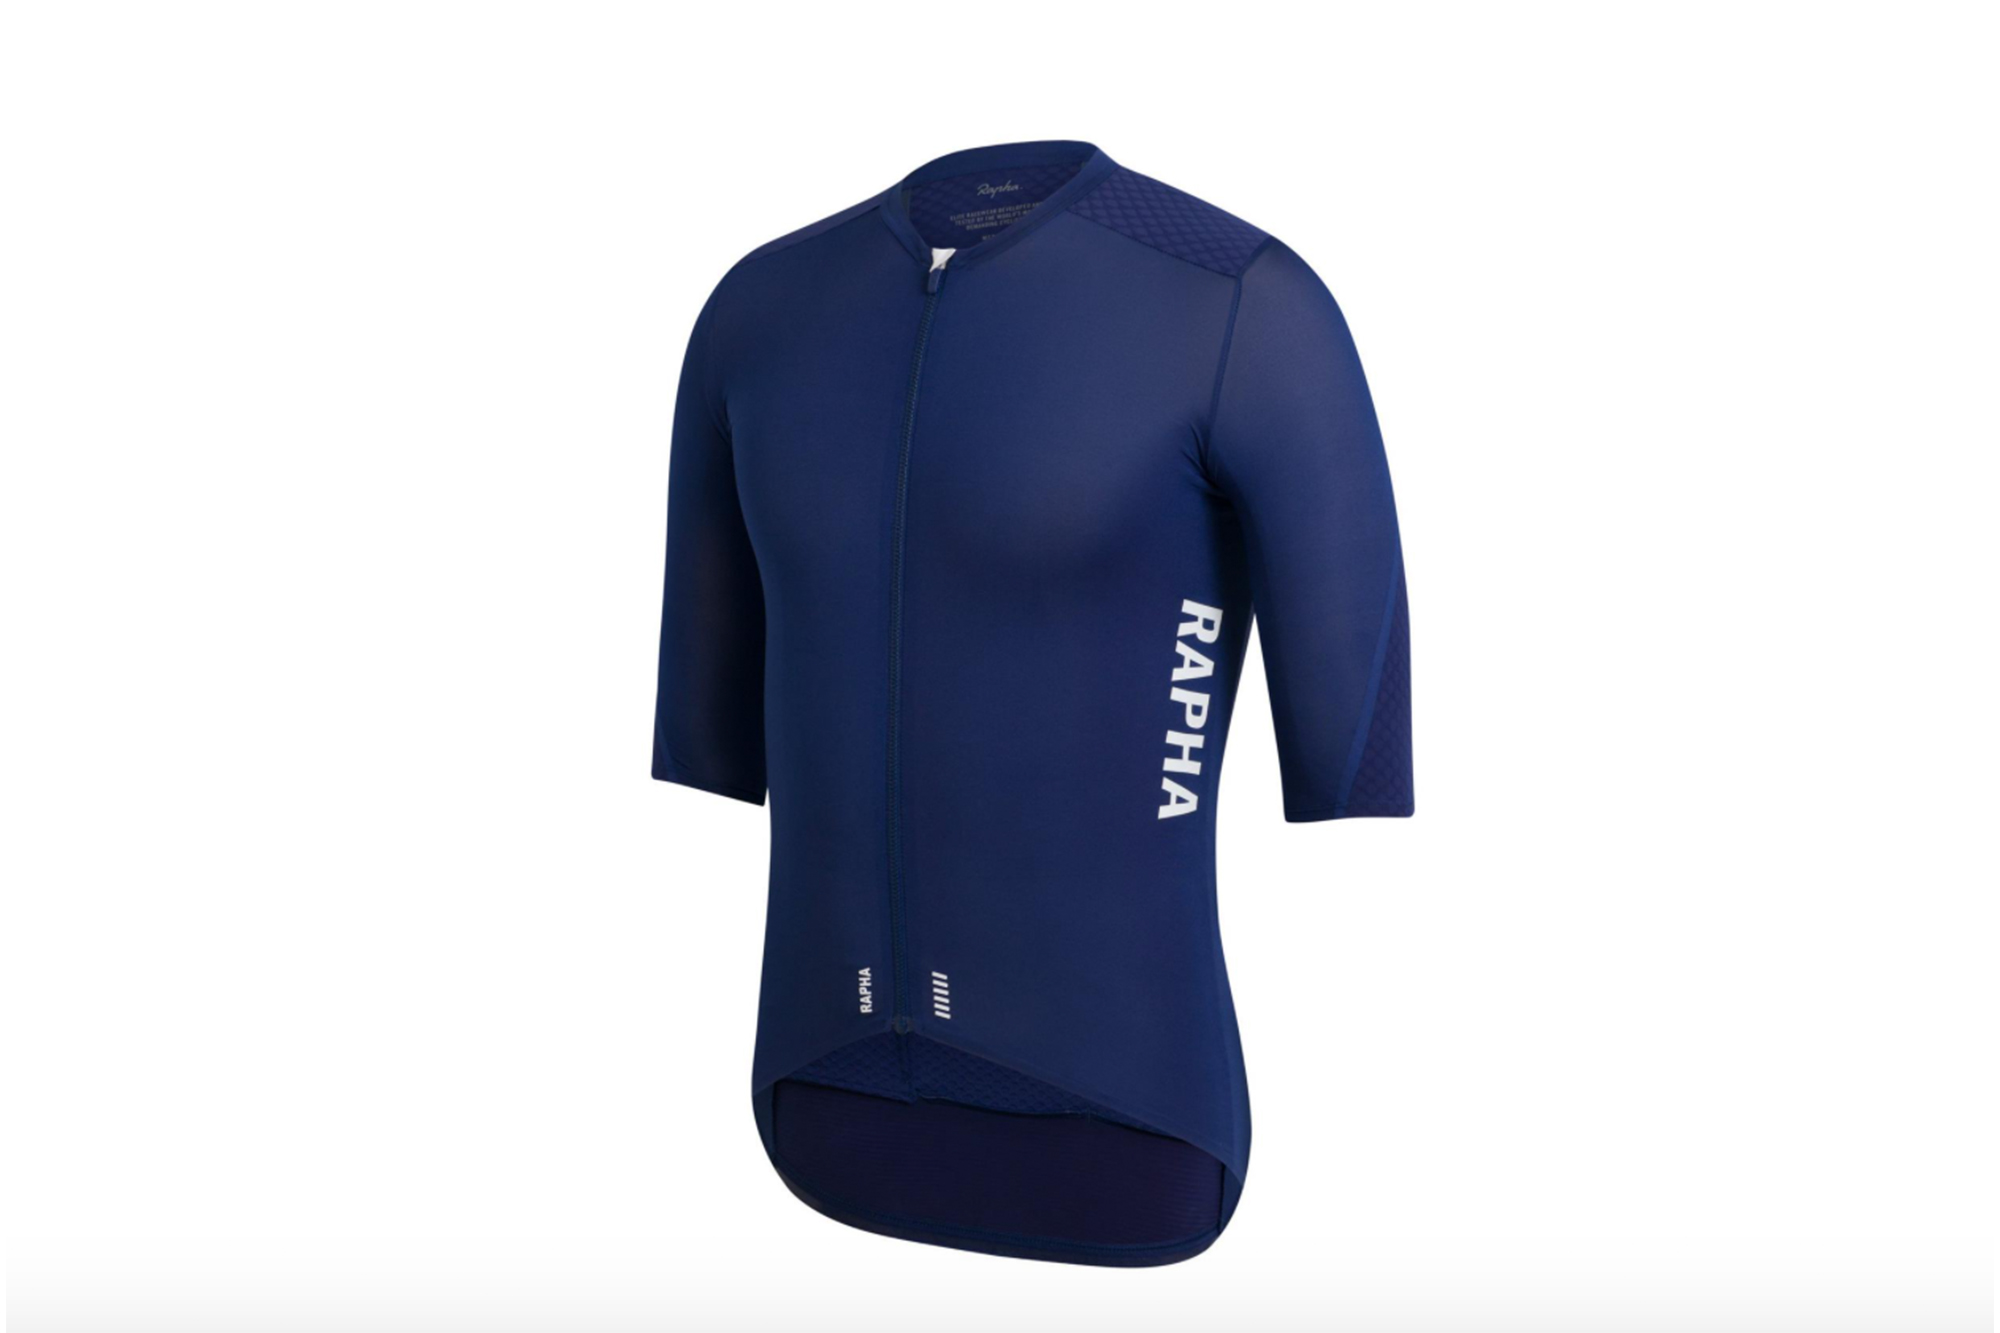 Tot stand brengen ambulance opslag Rapha Pro Team Aero jersey review | Cycling Weekly